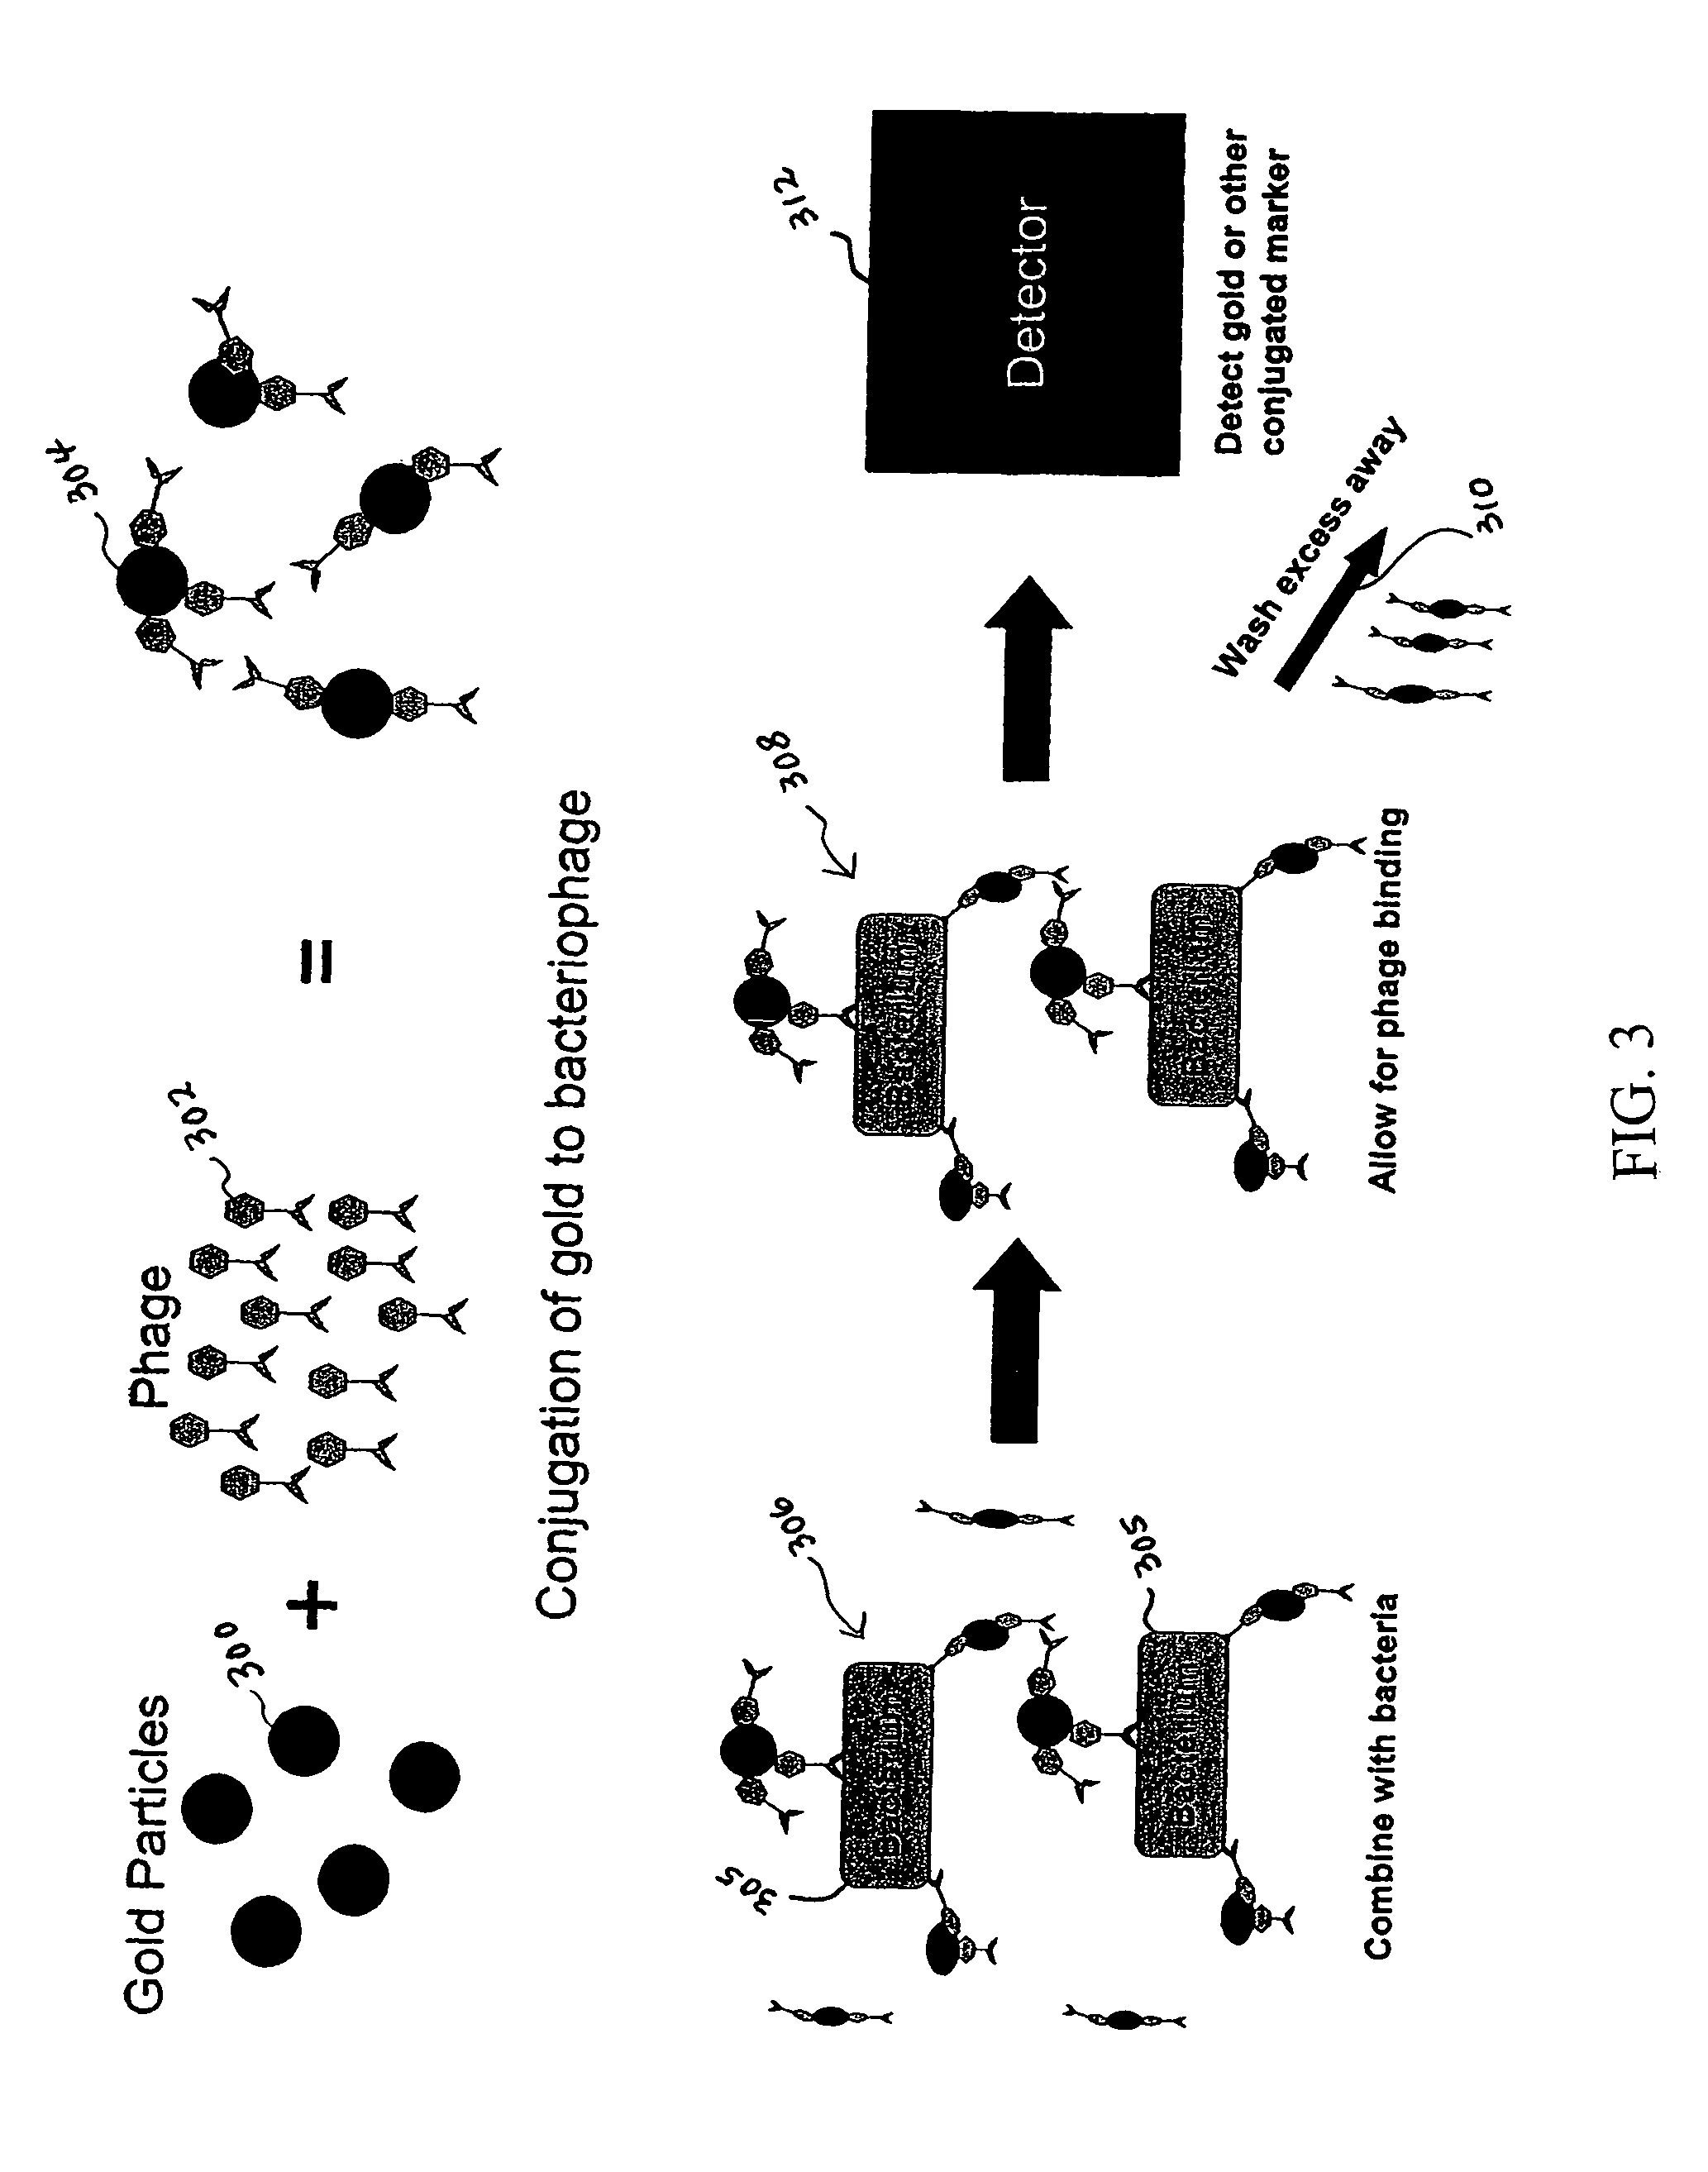 Apparatus and method for detecting microscopic organisms using bacteriophage